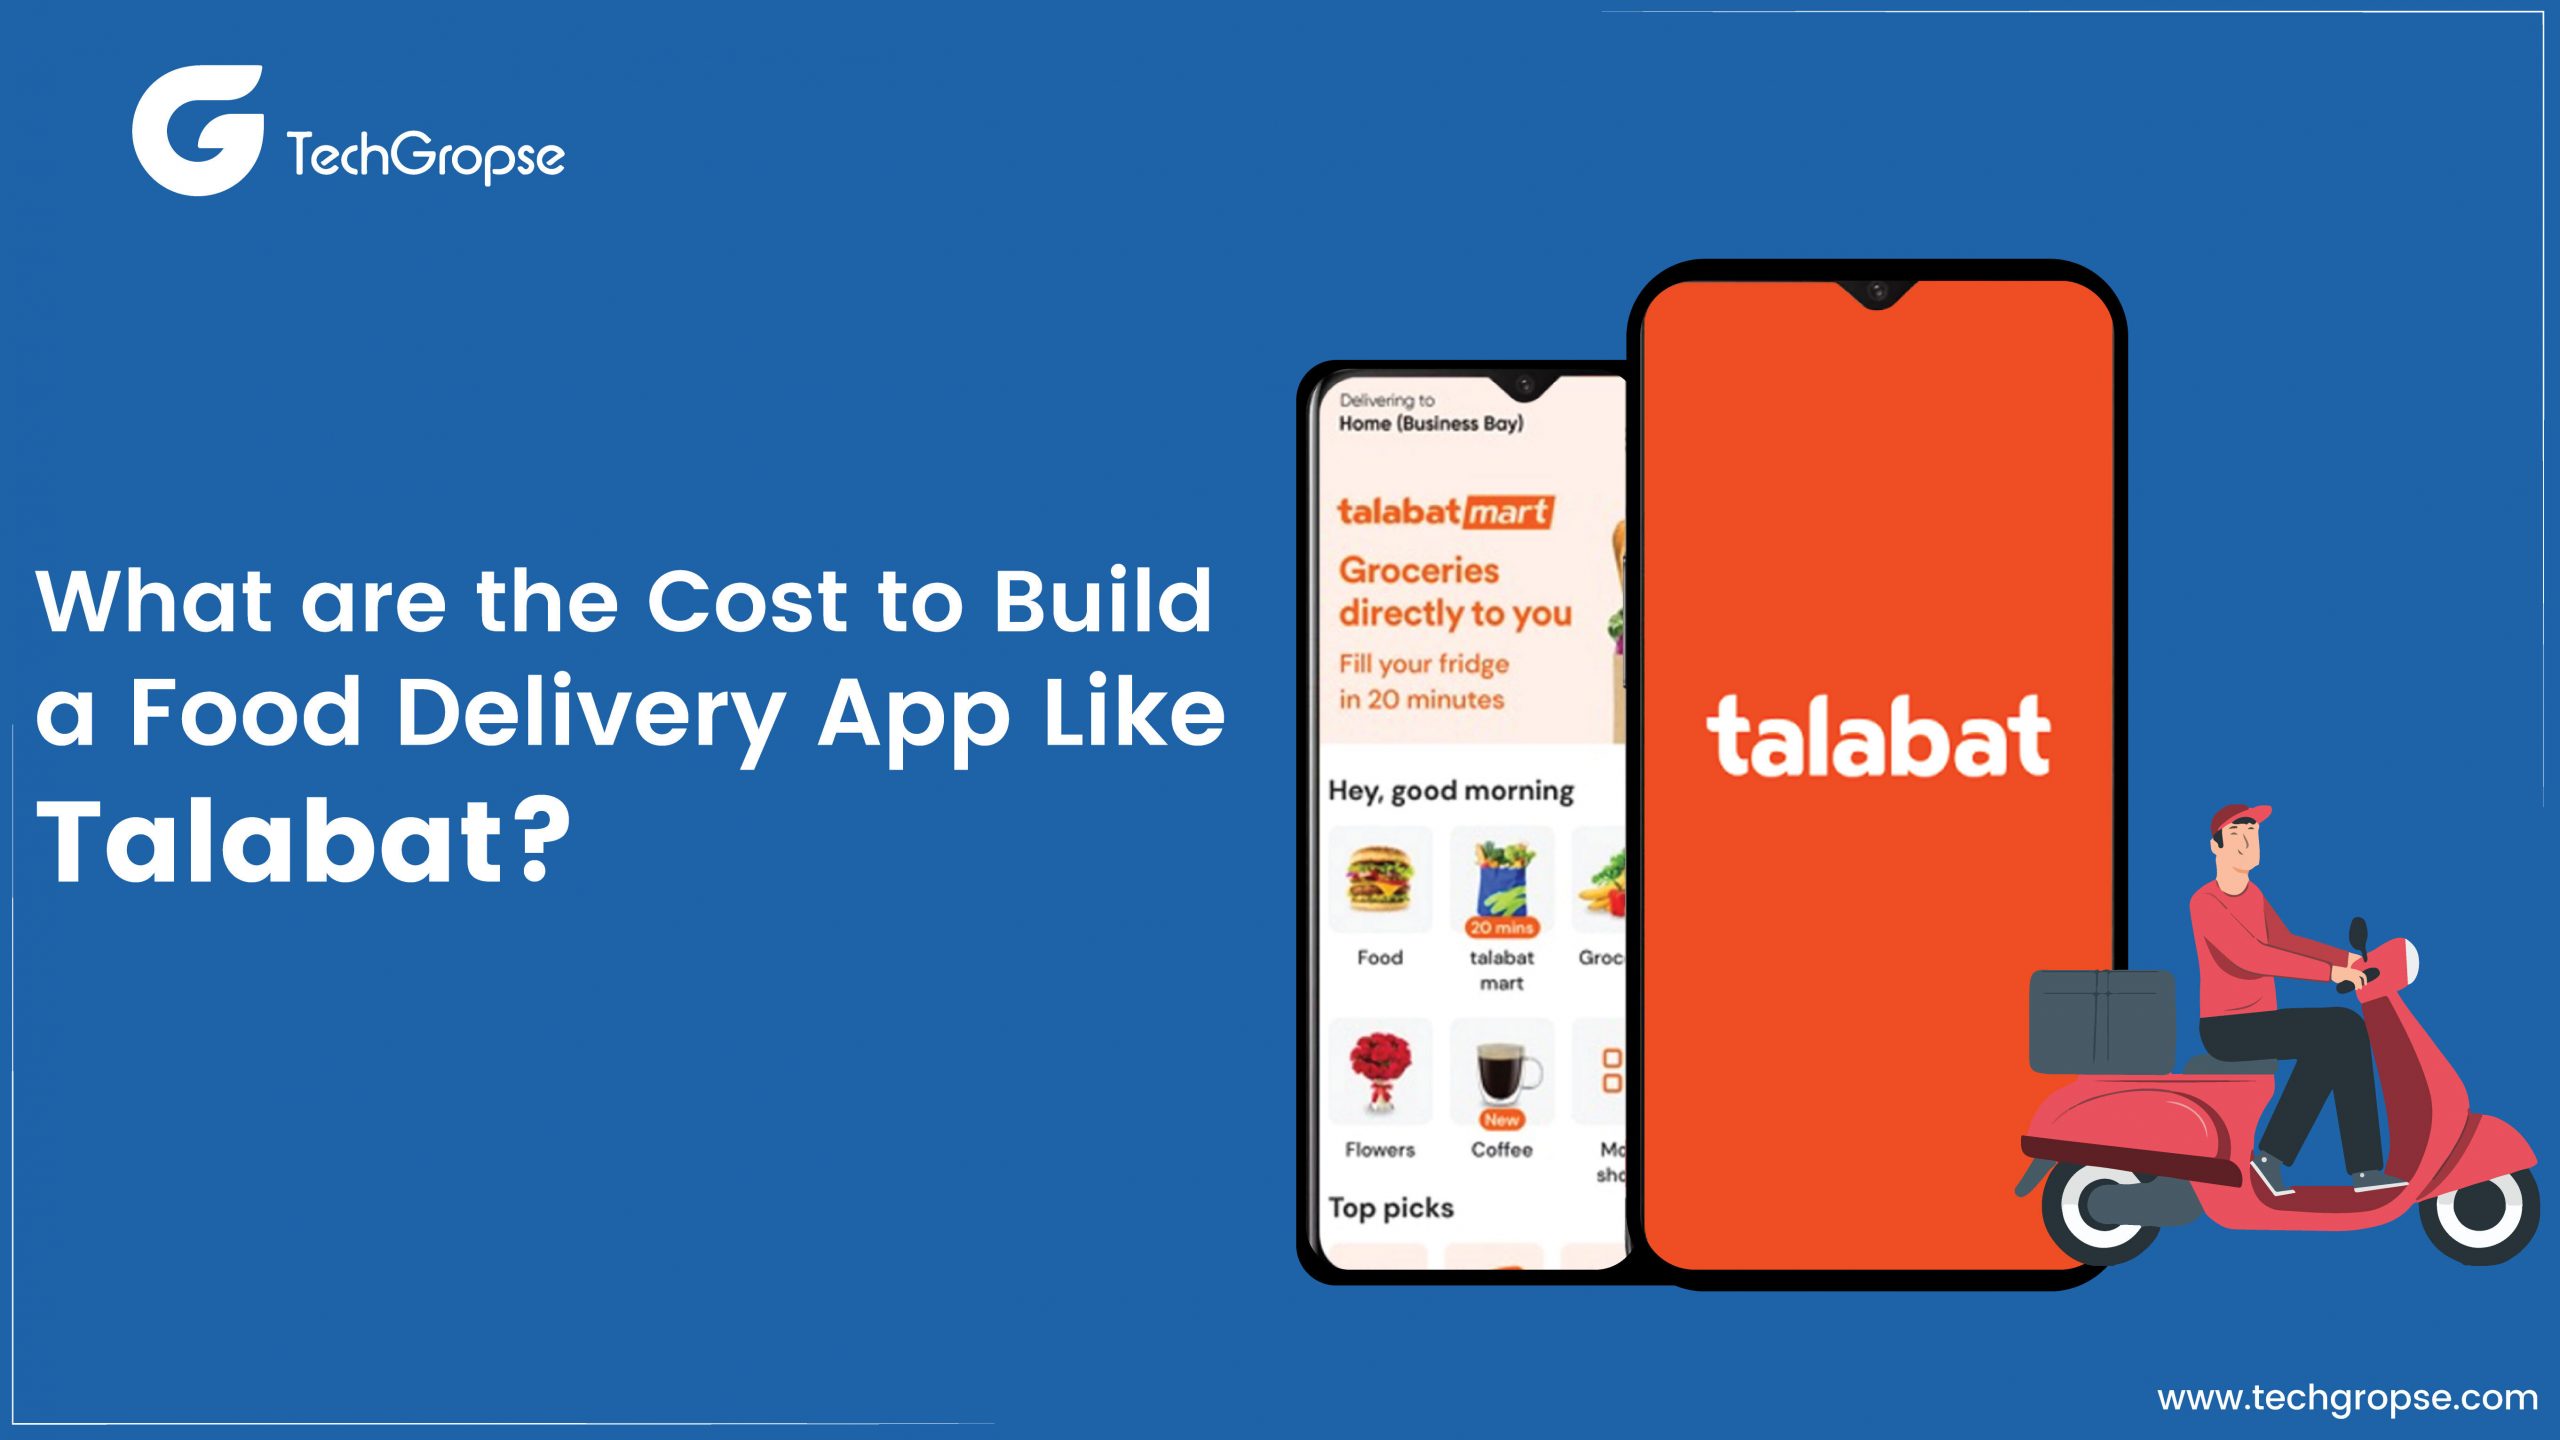 What is the Cost to Build a Food Delivery App Like Talabat?